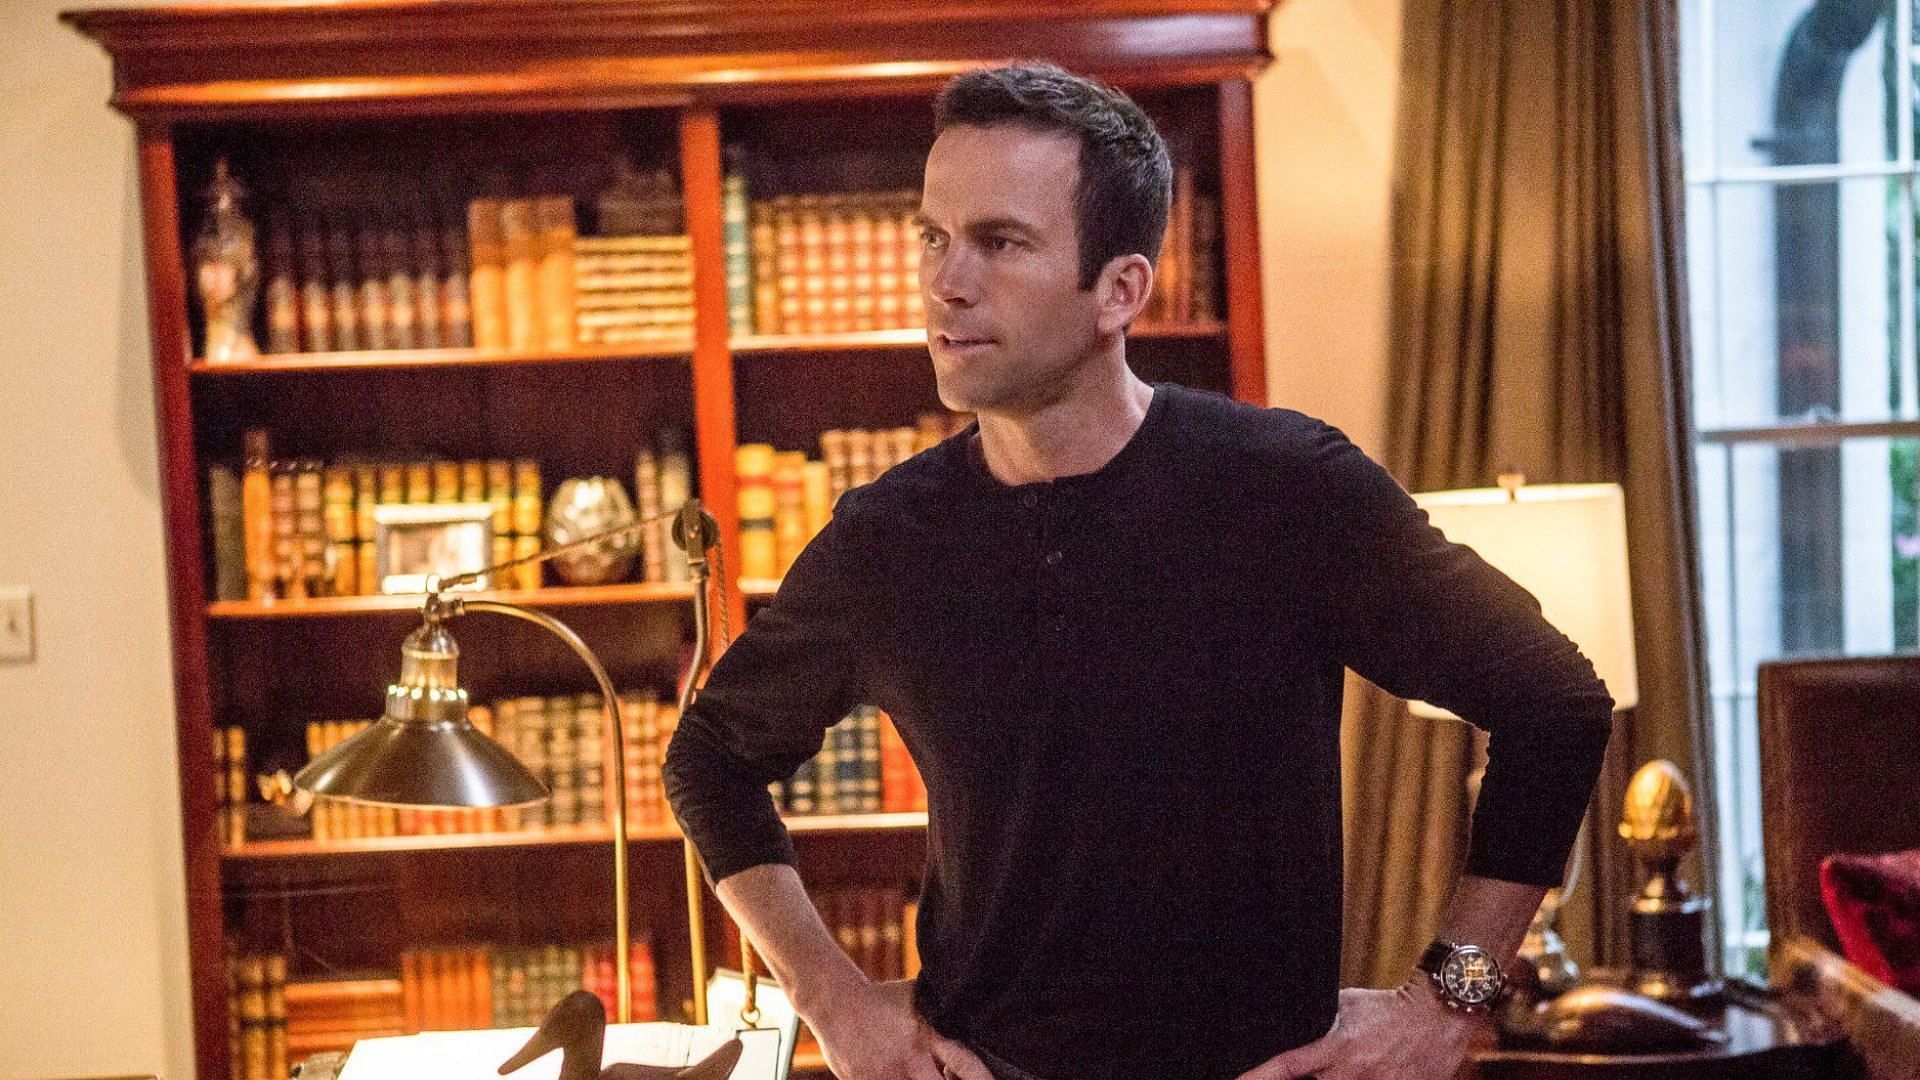 Lucas Black seen in the procedural drama series NCIS - New Orleans (Image via Facebook/NCIS New Orleans)